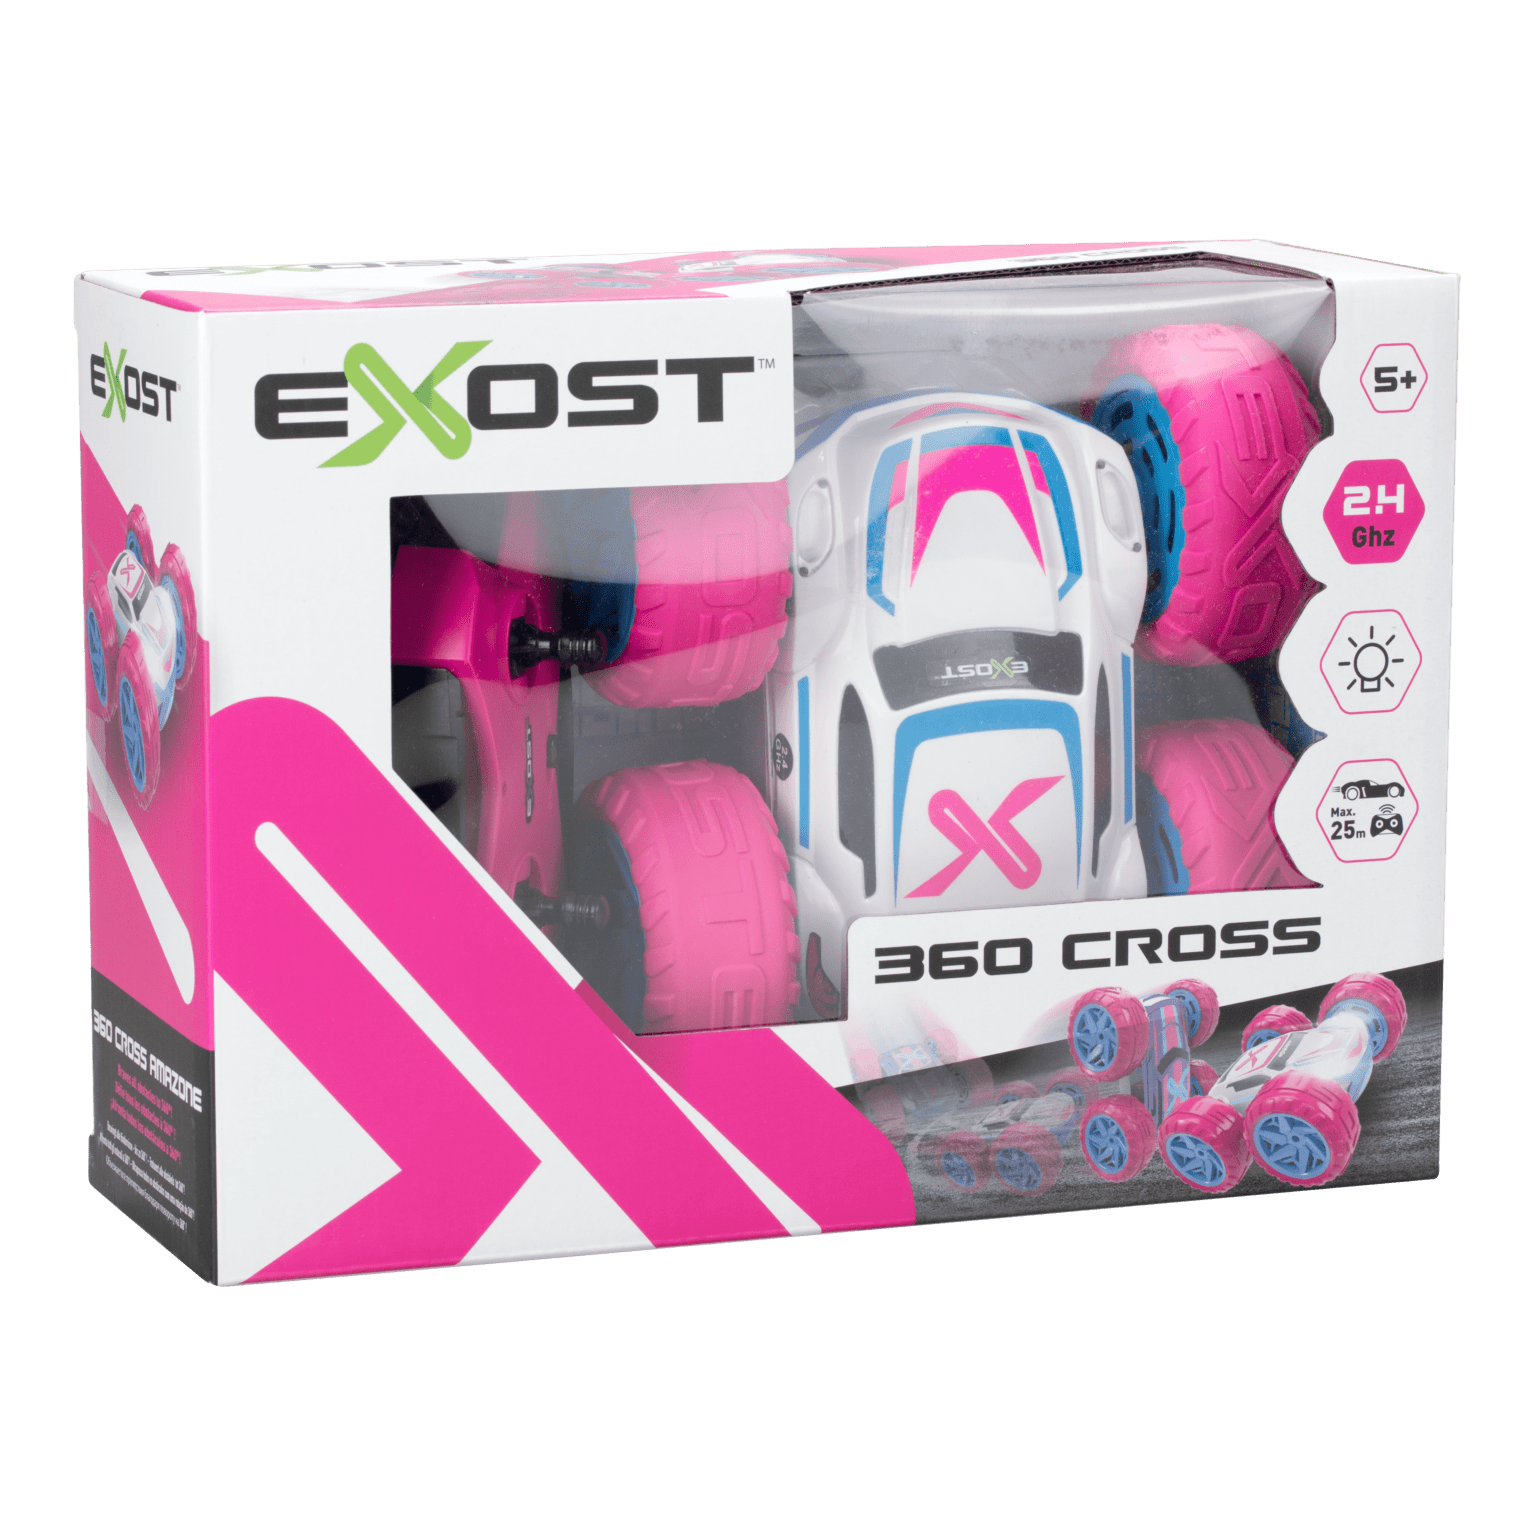 Voiture bigfoot exost r/c 360 cross rose+5ans – Orca